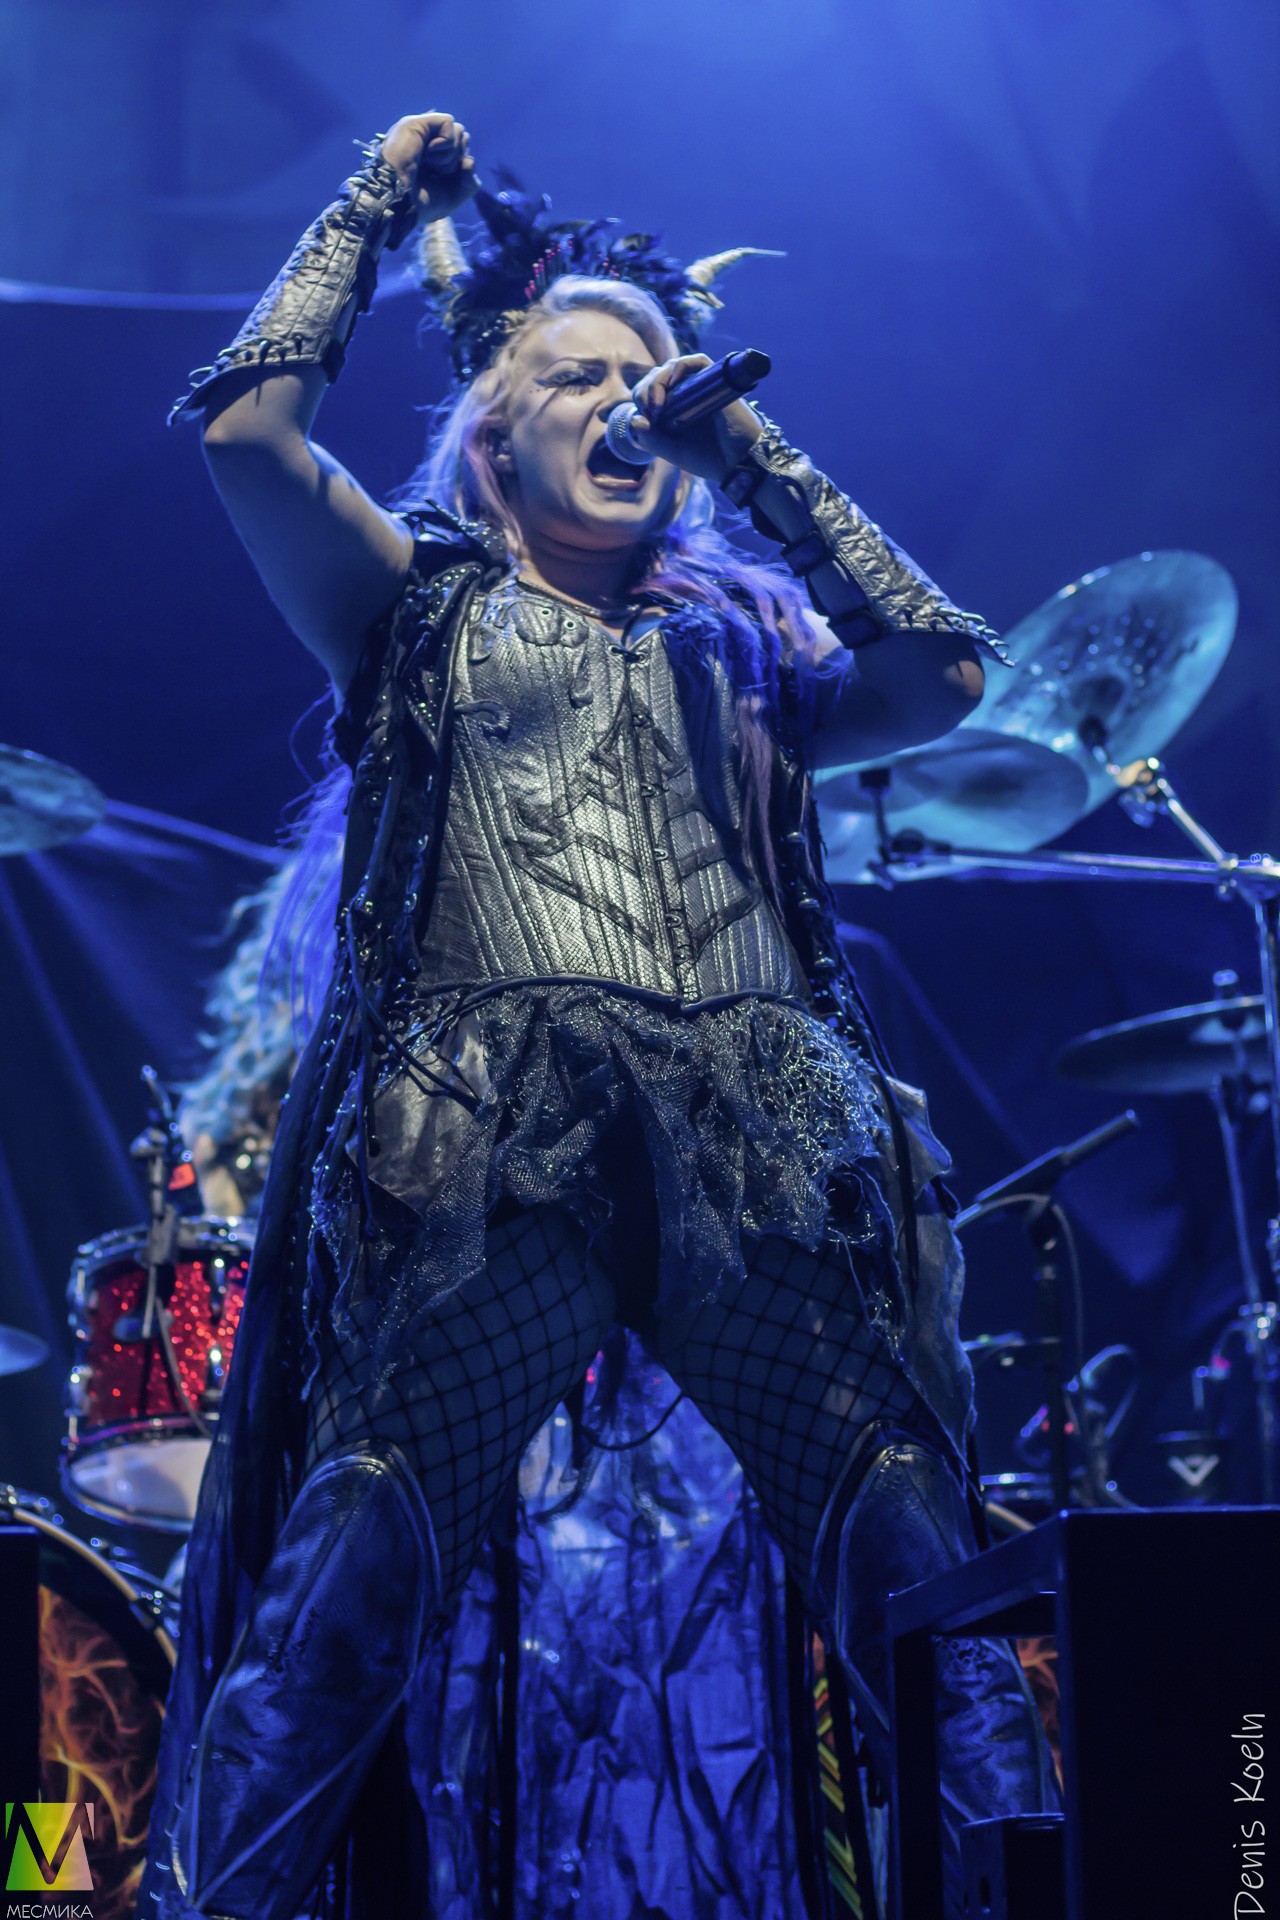 Noora Louhimo (Vocal), Battle Beast in Ludwigsburg 15.02.2020